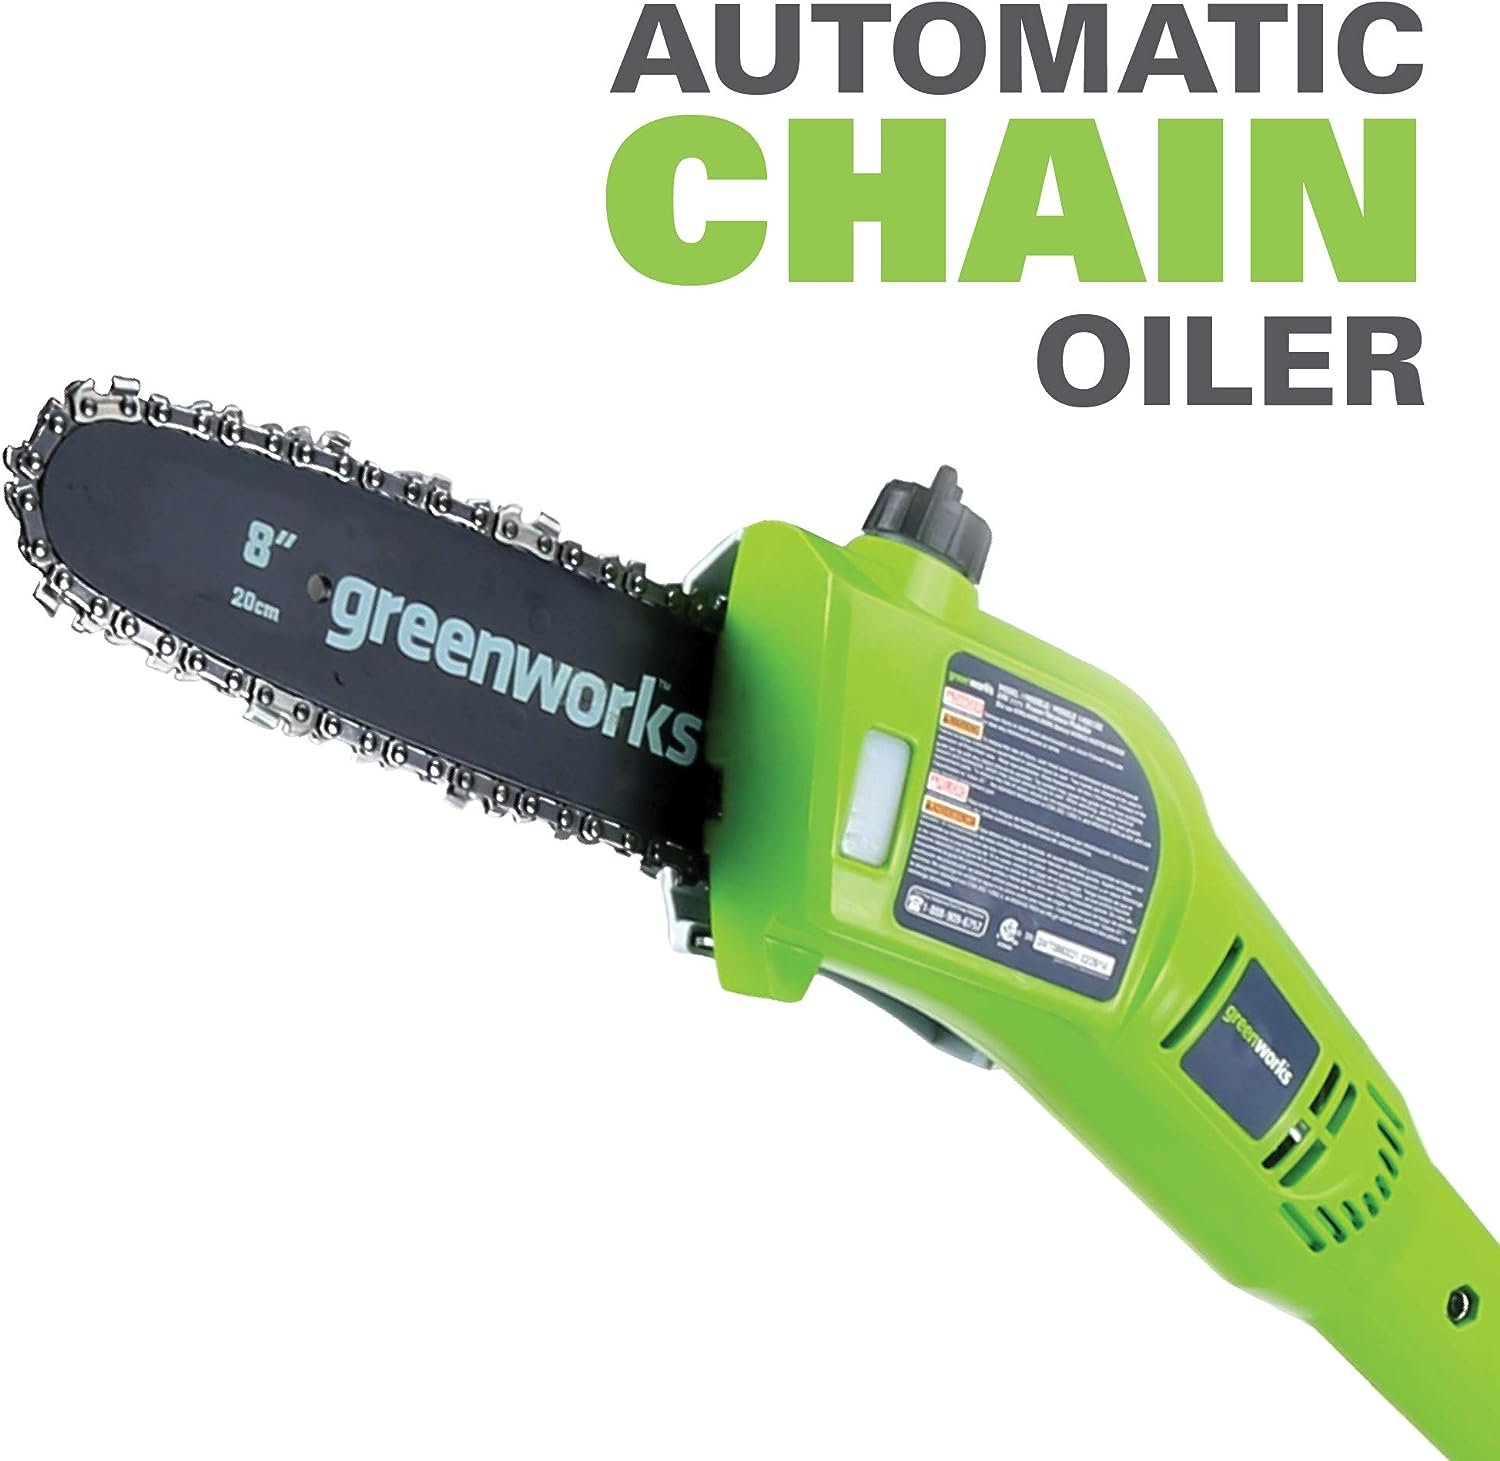 Greenworks 8.5′ 40V Cordless Pole Saw review